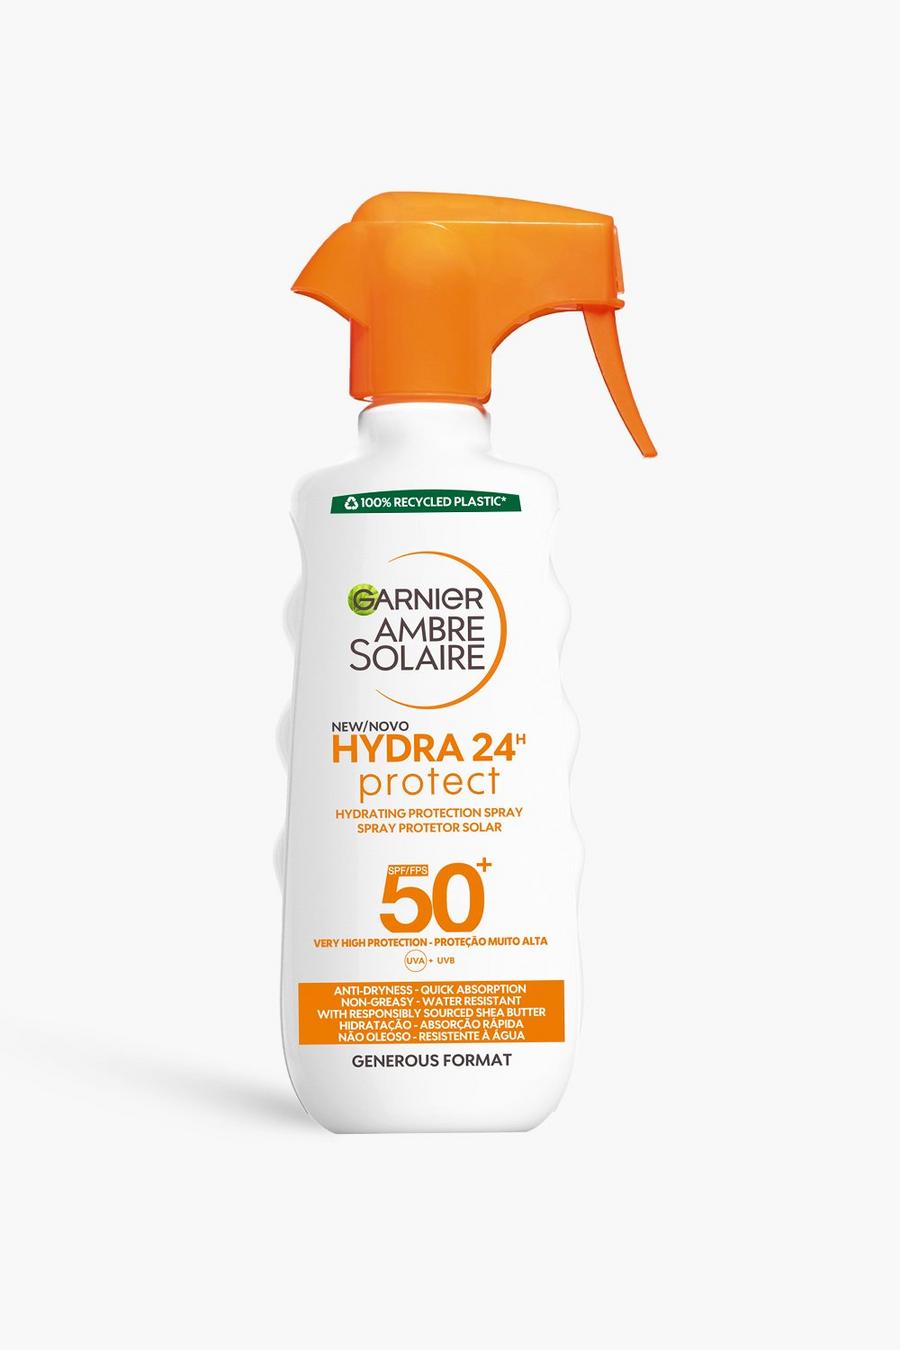 Garnier - Ambre solaire spray hydratant protection 24h SPF 50 - 300ml, White image number 1